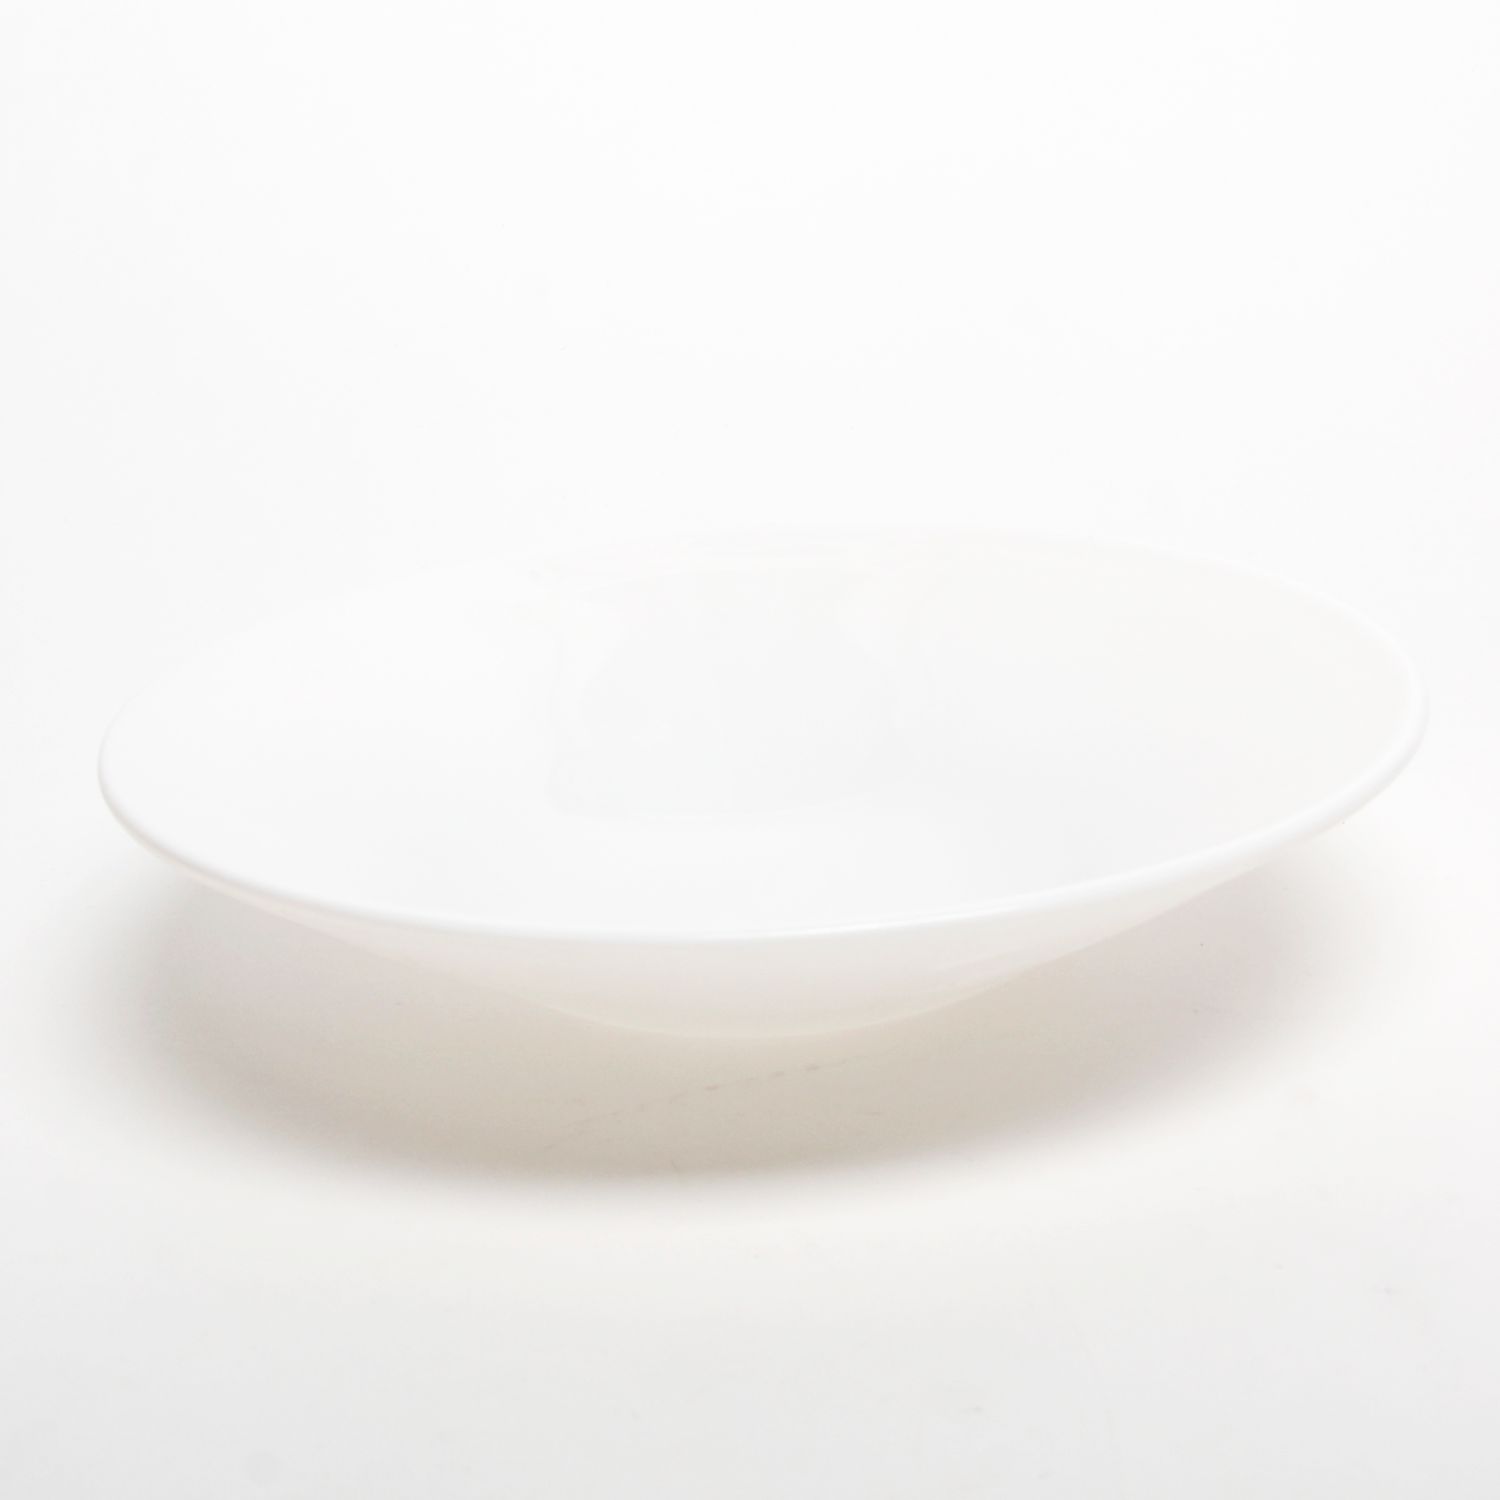 Gordon Boyd: Crosshatch Bowl in White Product Image 2 of 2